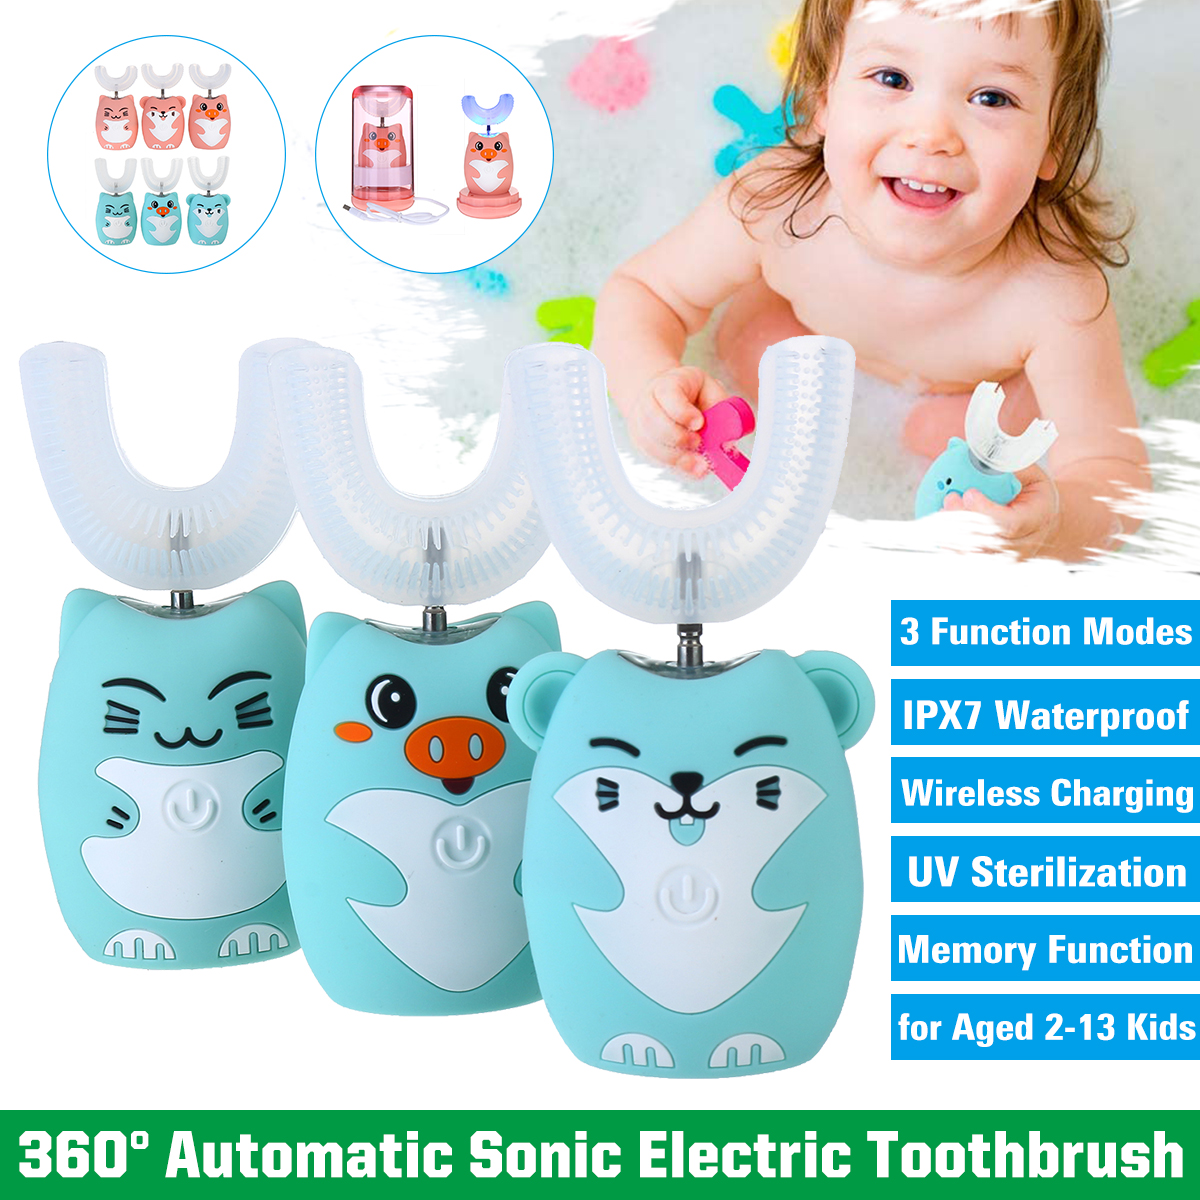 360deg-Sonic-Automatic-Electric-Toothbrush-3-Modes-With-UV-Light-for-Aged-2-13-Kid-1765744-1